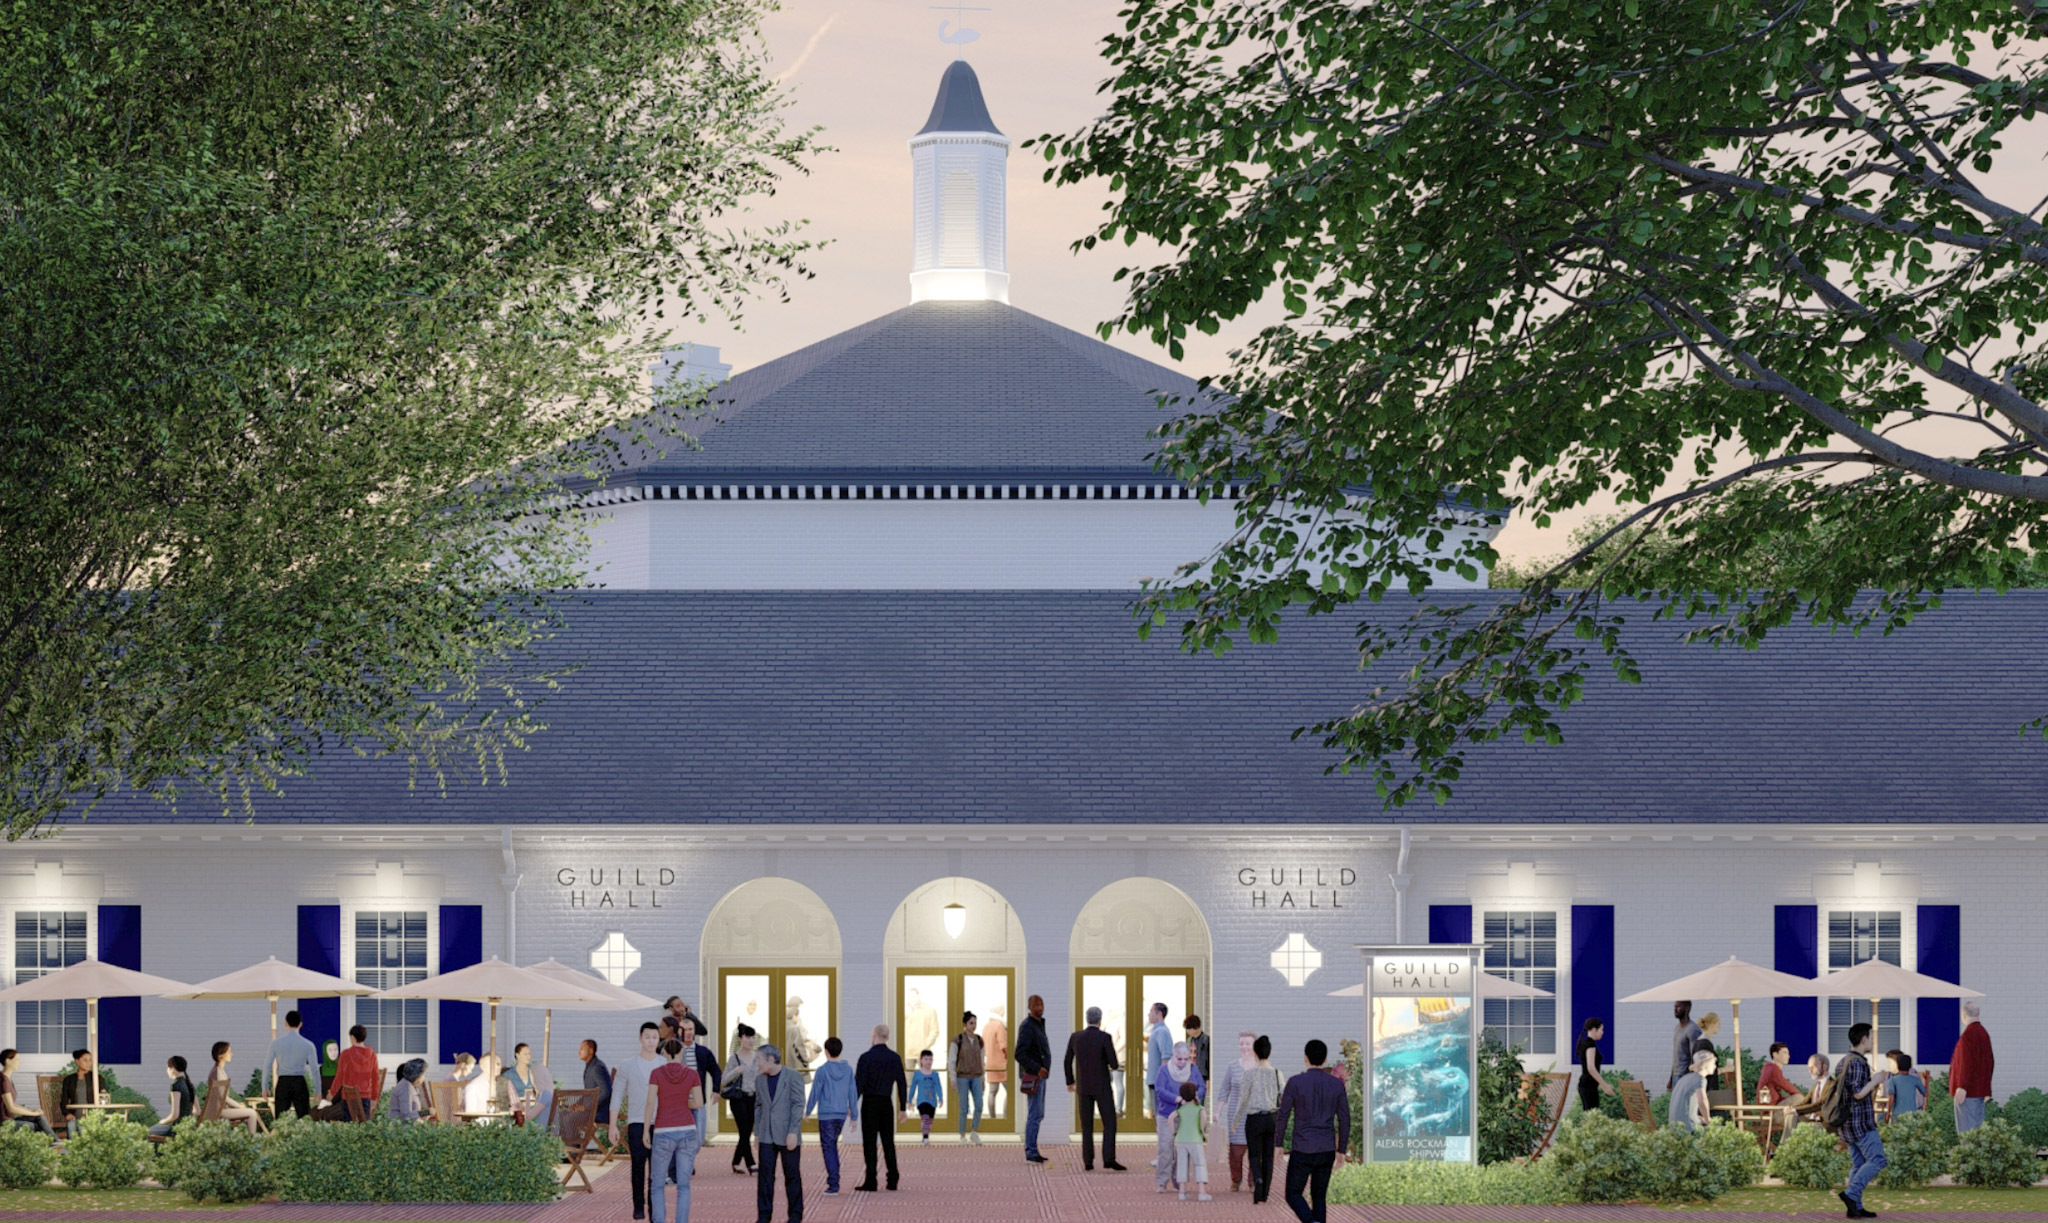 Exterior design image of Guild Hall's planned renovation. © GUILD HALL, PETER PENNOYER ARCHITECTS, AND HOLLANDER DESIGN LANDSCAPE ARCHITECTS, 2022.